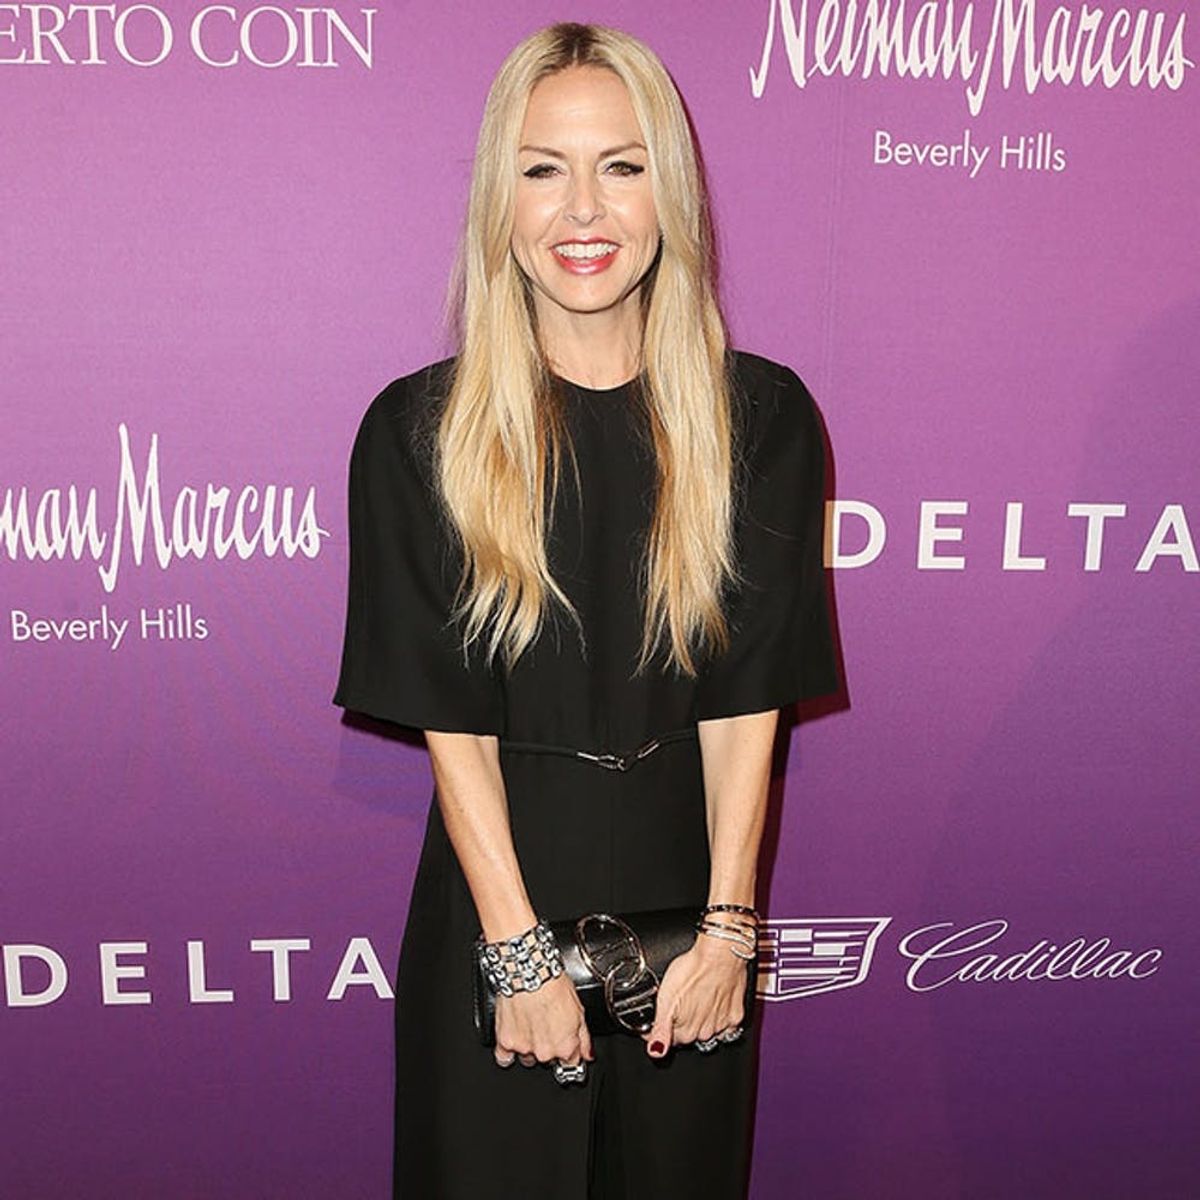 Here’s How to Get Rachel Zoe to Be Your Stylist